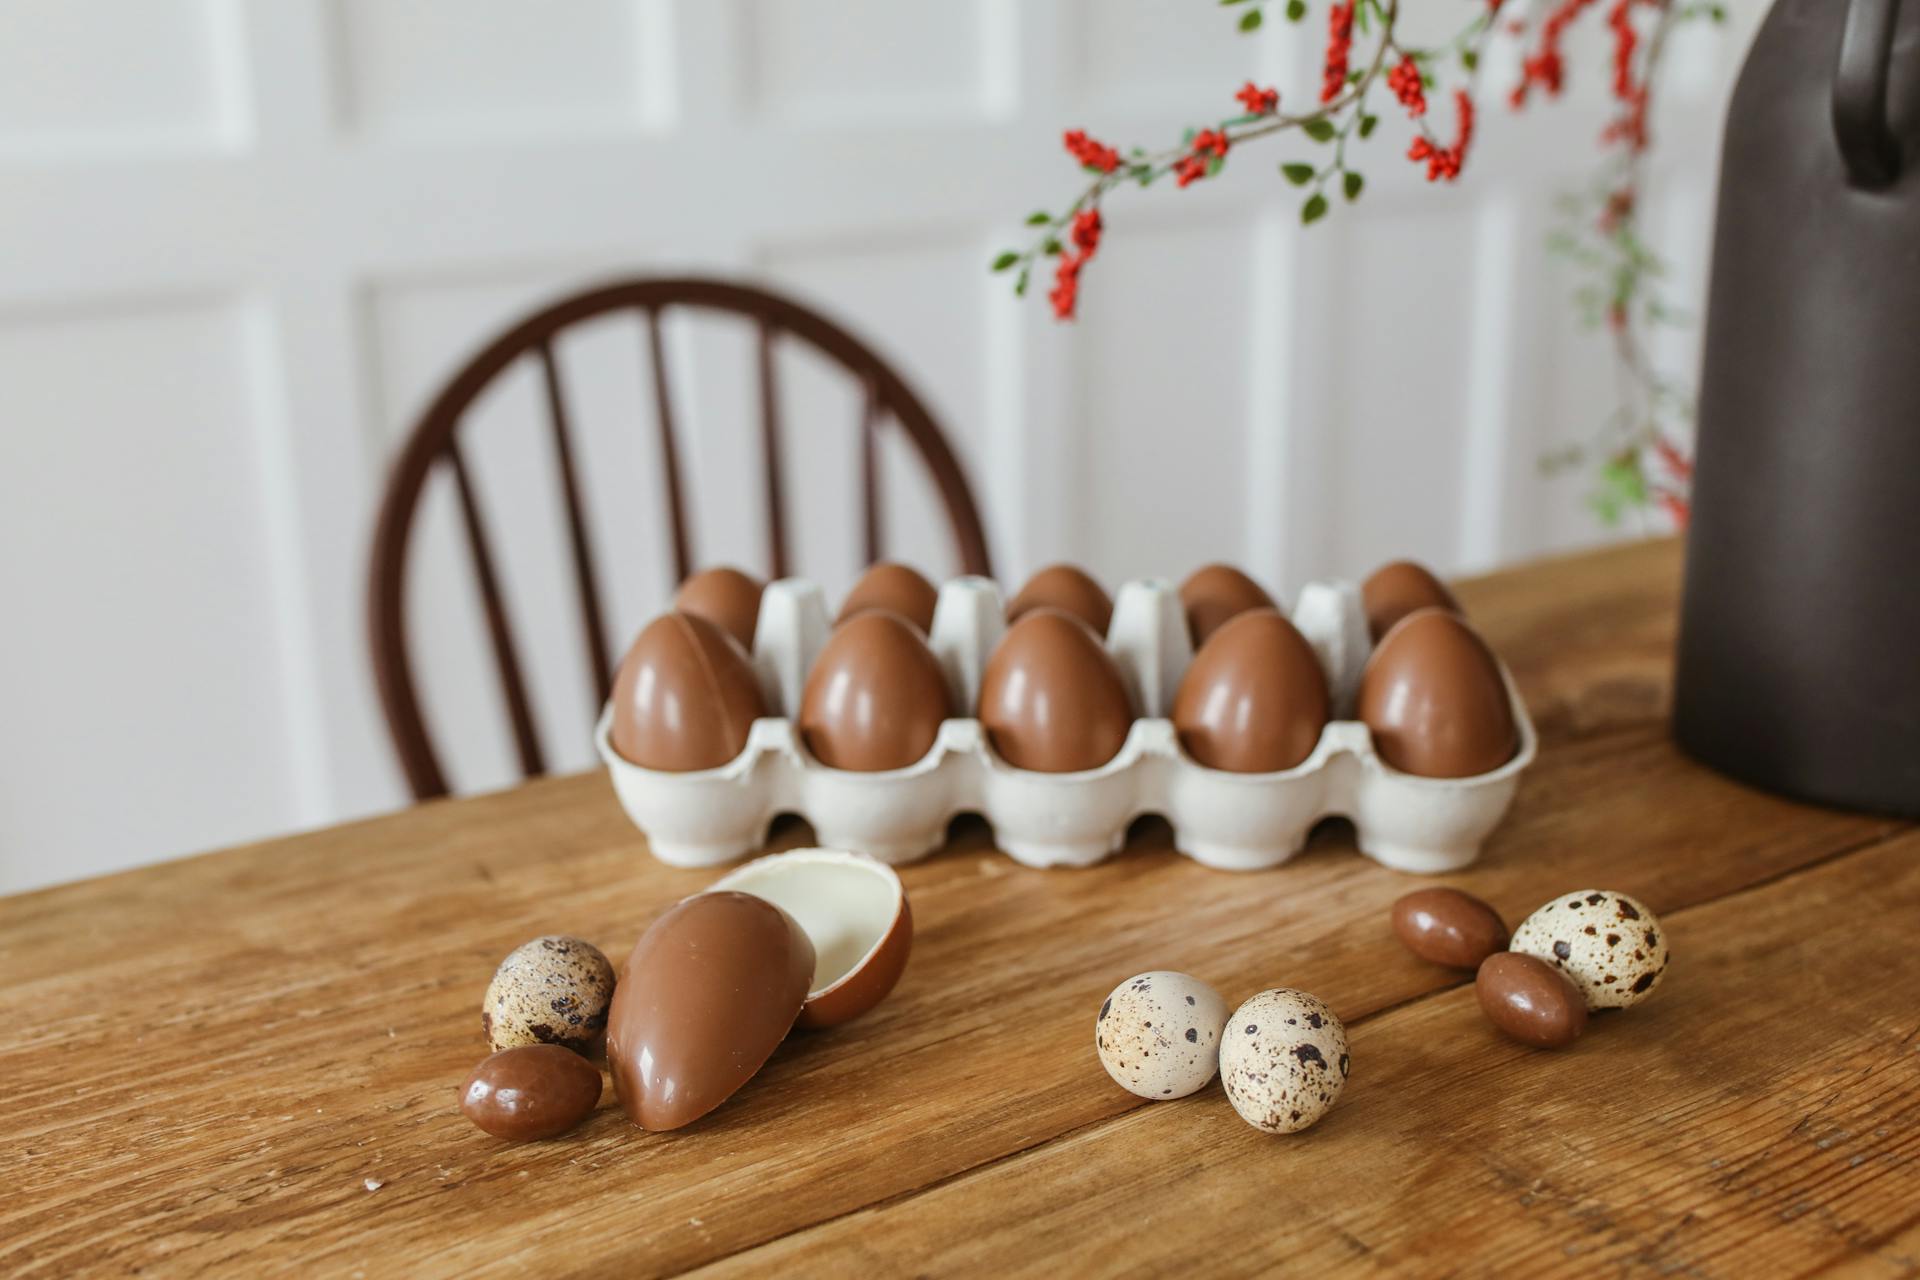 Diversification – should you put all your eggs in one basket?